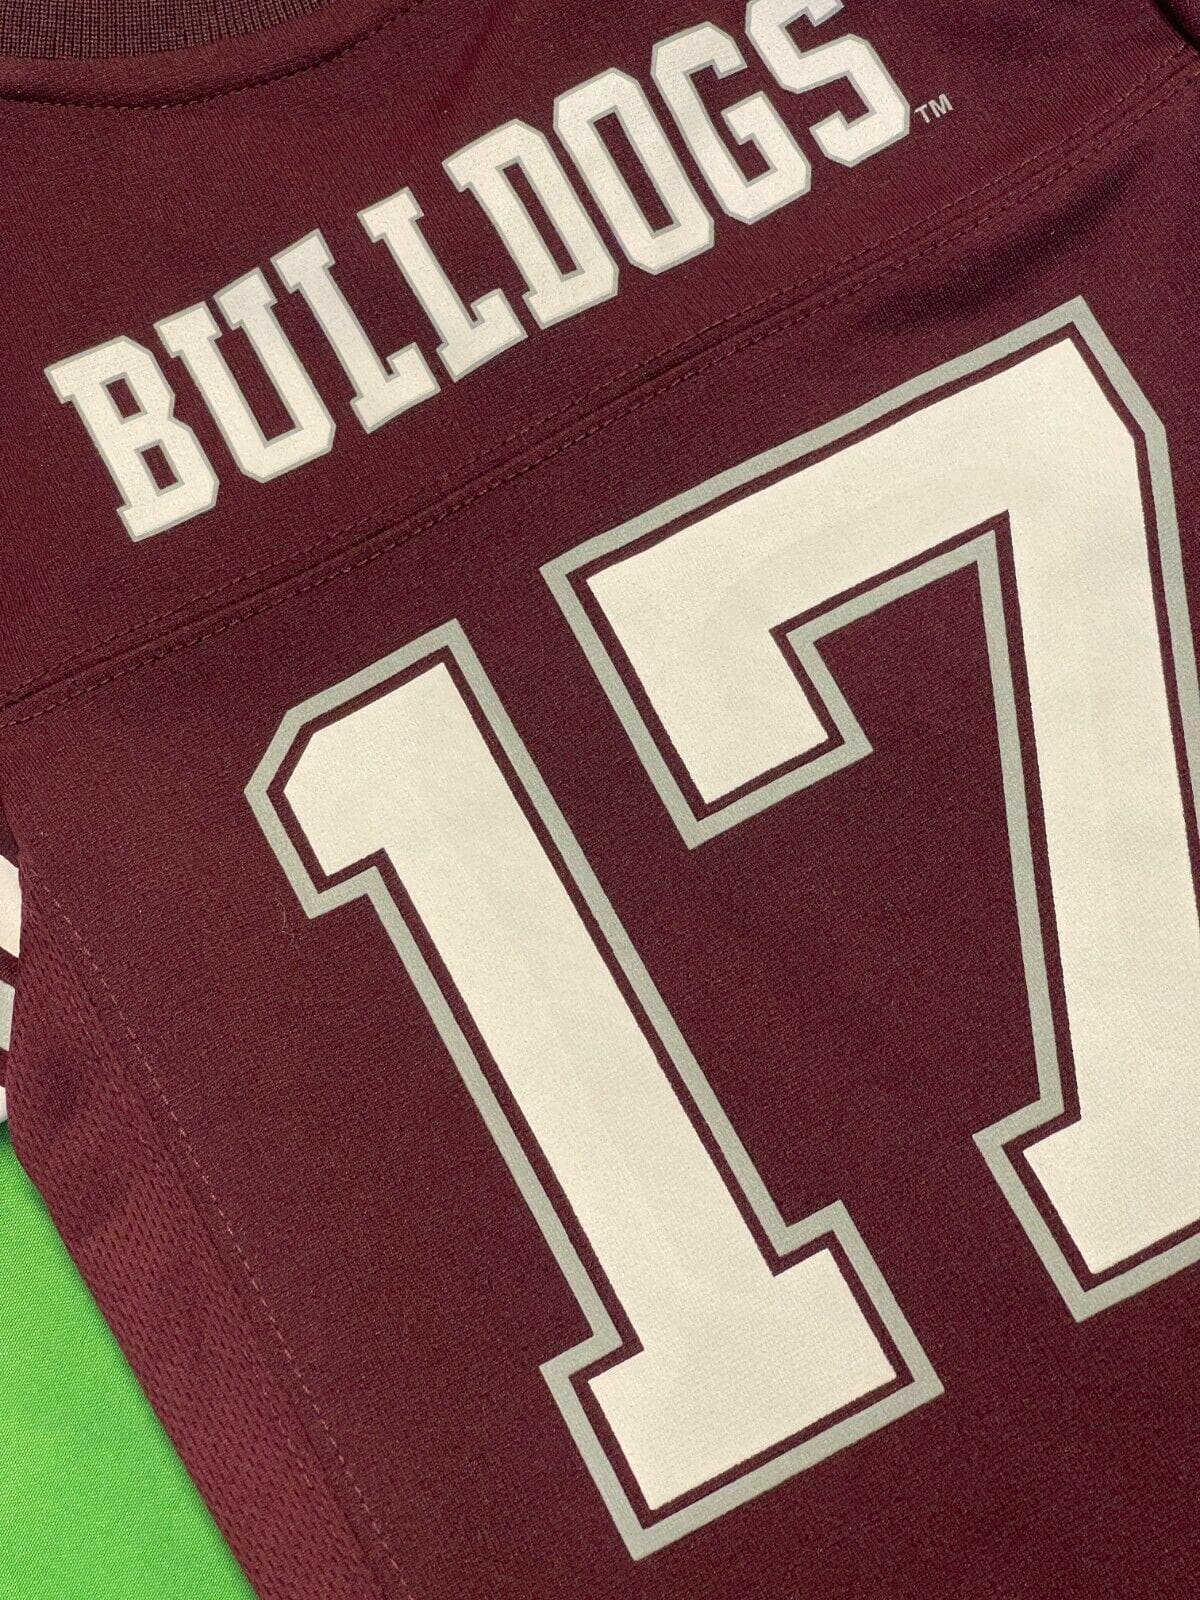 NCAA Mississippi State Bulldogs Colosseum Jersey #17 Toddler 2T NWT